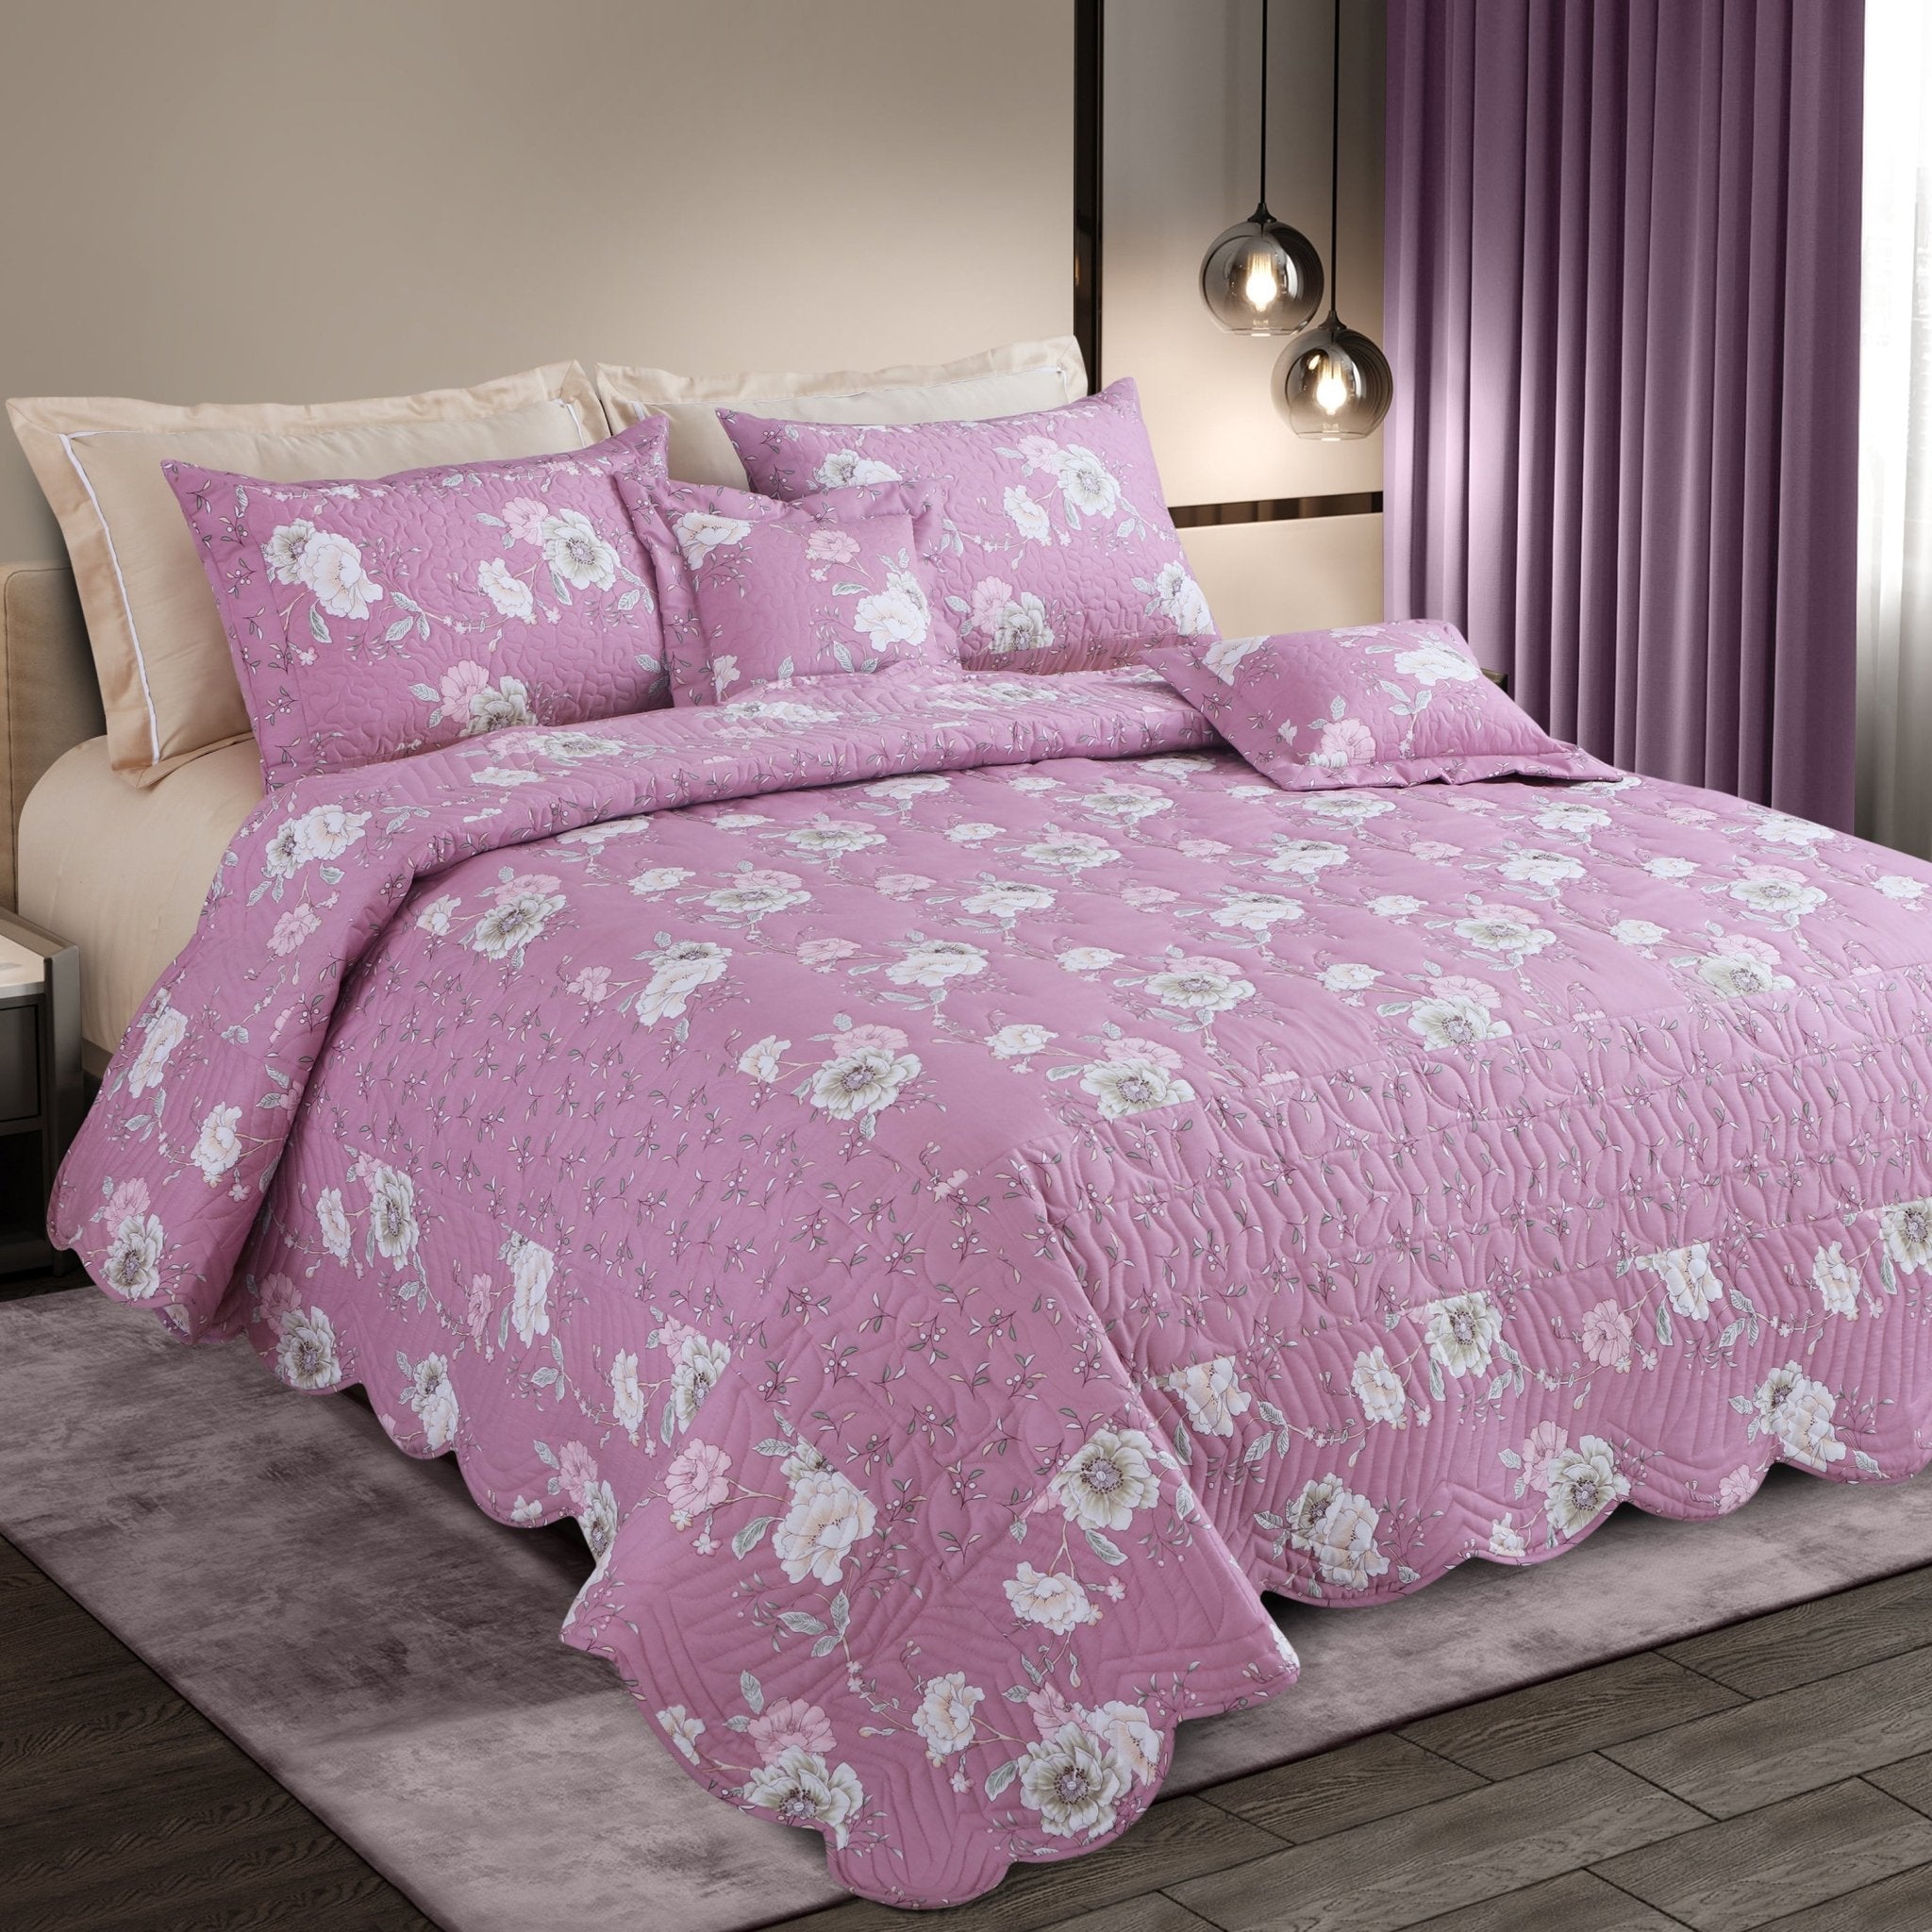 Malako Royale 100% Cotton Taffy Pink Floral King Size 5 Piece Quilted Bedspread Set - MALAKO